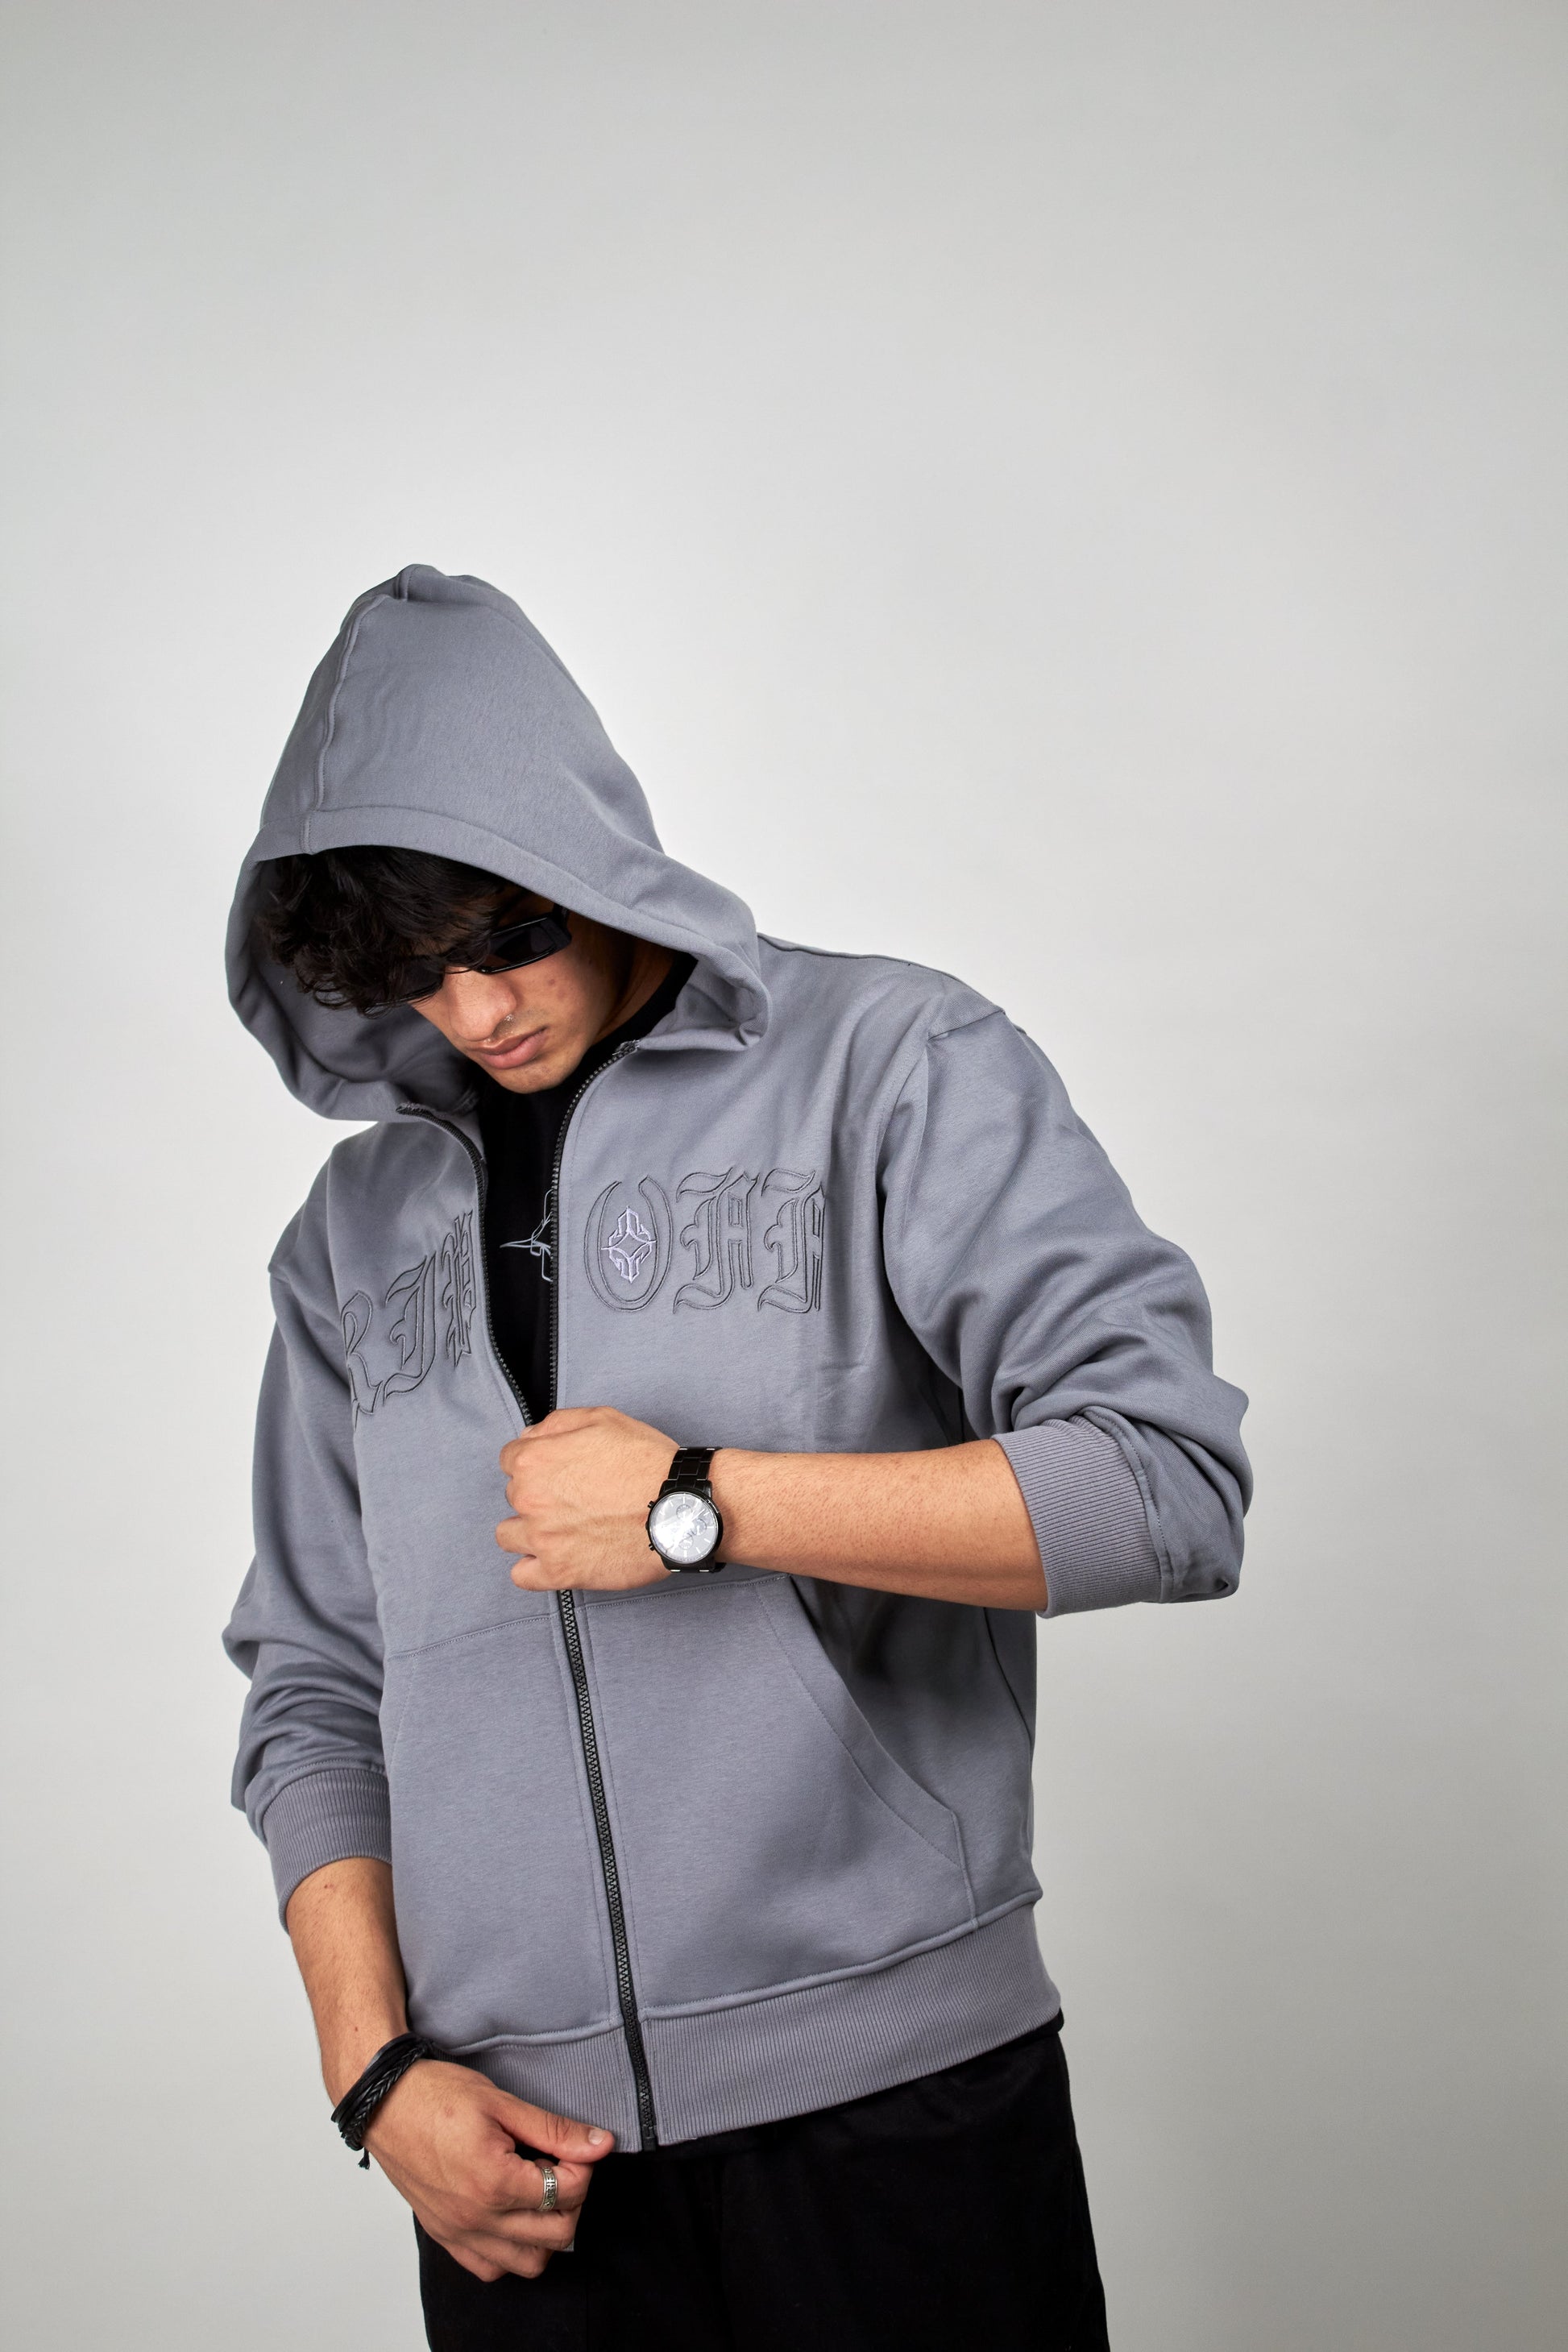 ZIPPED HOODIE (Outerwear) by Ripoff